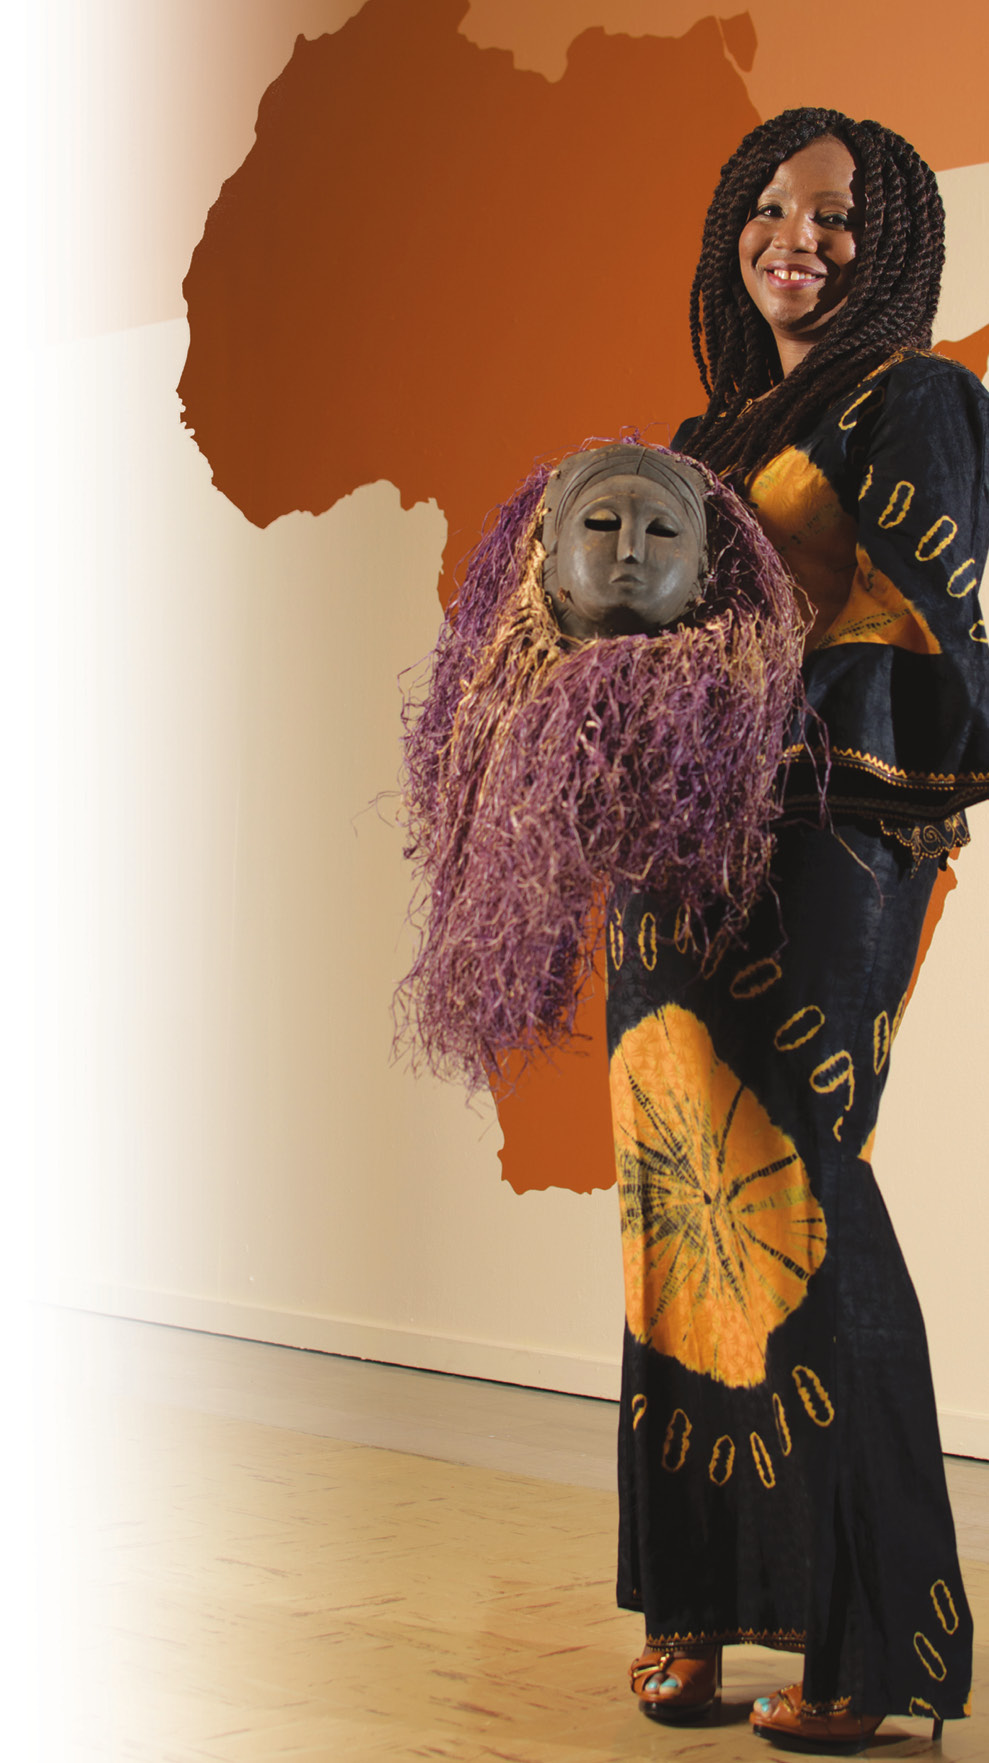 Nwando Achebe holds a mask used in religious practices in Nigeria. The spirit of a deceased loved one visits via the mask during a ceremonial performance.